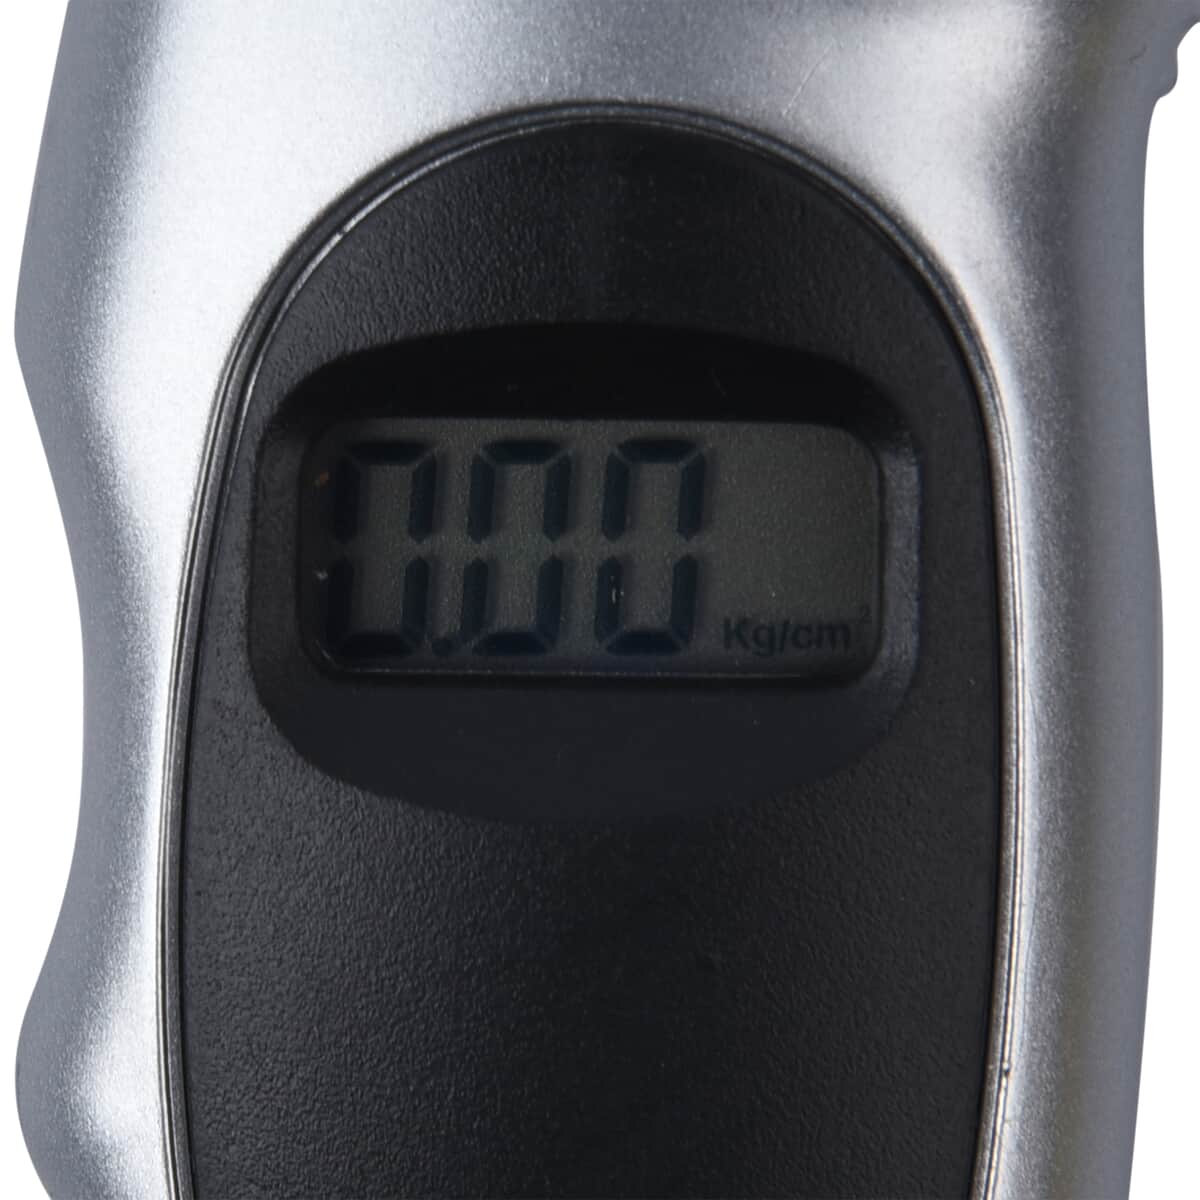 Heavy Duty Battery Operated Gray Digital Tire Pressure Gauge with Backlit LCD Display Screen, Tire Inflator, Lighted Nozzle, Non-slip Handle Grip image number 4